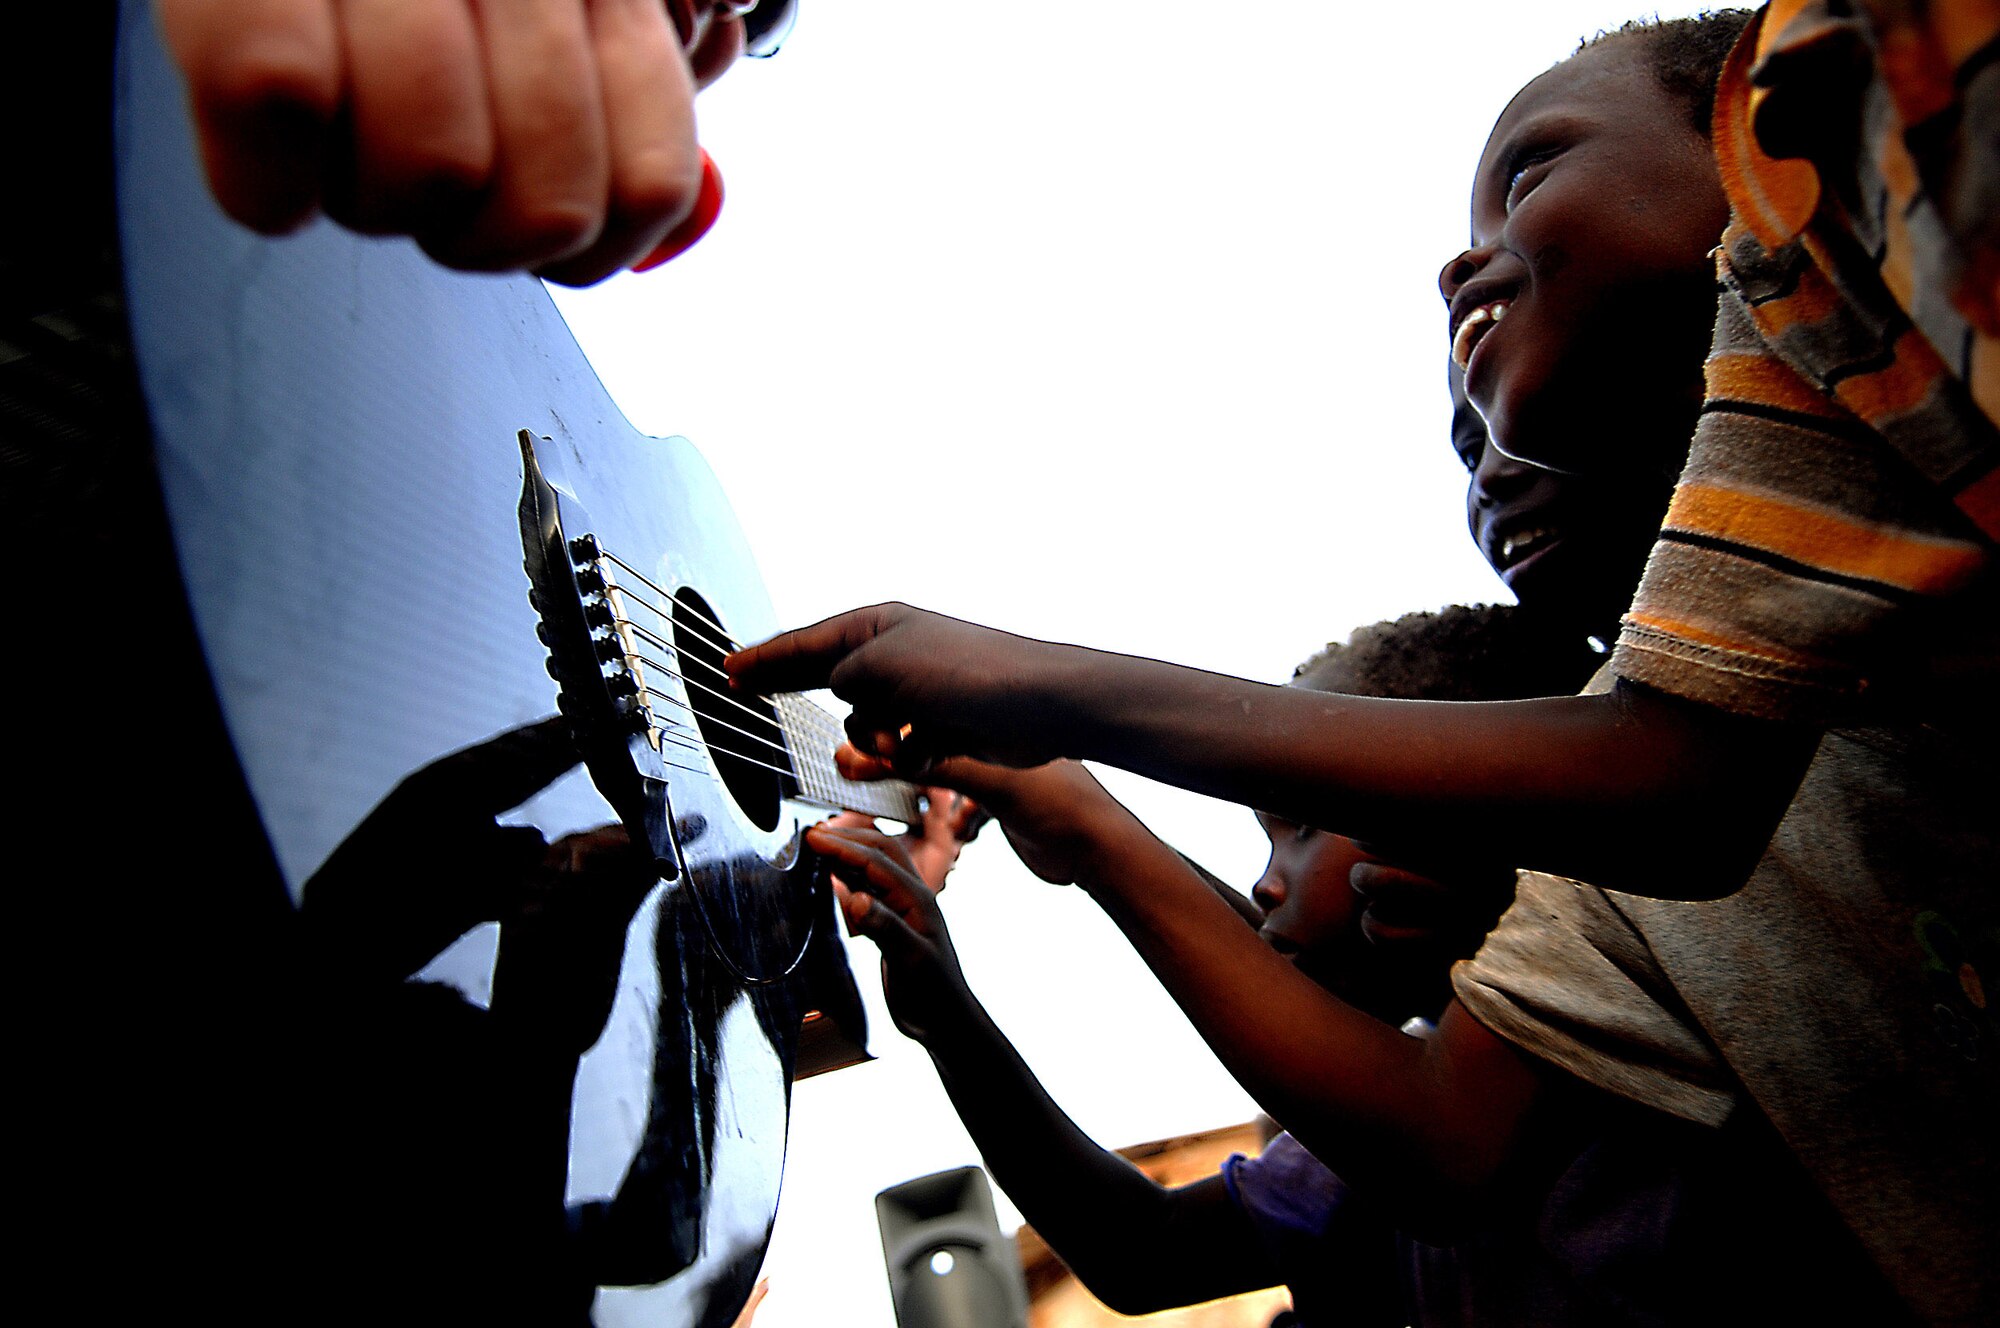 Djiboutian children explore Senior Master Sgt. Jimmy Weber's guitar during a performance May 22 by the Air Force Central command band, Falcon, in Negad, Djibouti.  The band is deployed in support of Combined Joint Task Force - Horn of Africa out of Camp Lemonier, Djibouti. (U.S. Air Force photo/Tech. Sgt. Jeremy T. Lock)